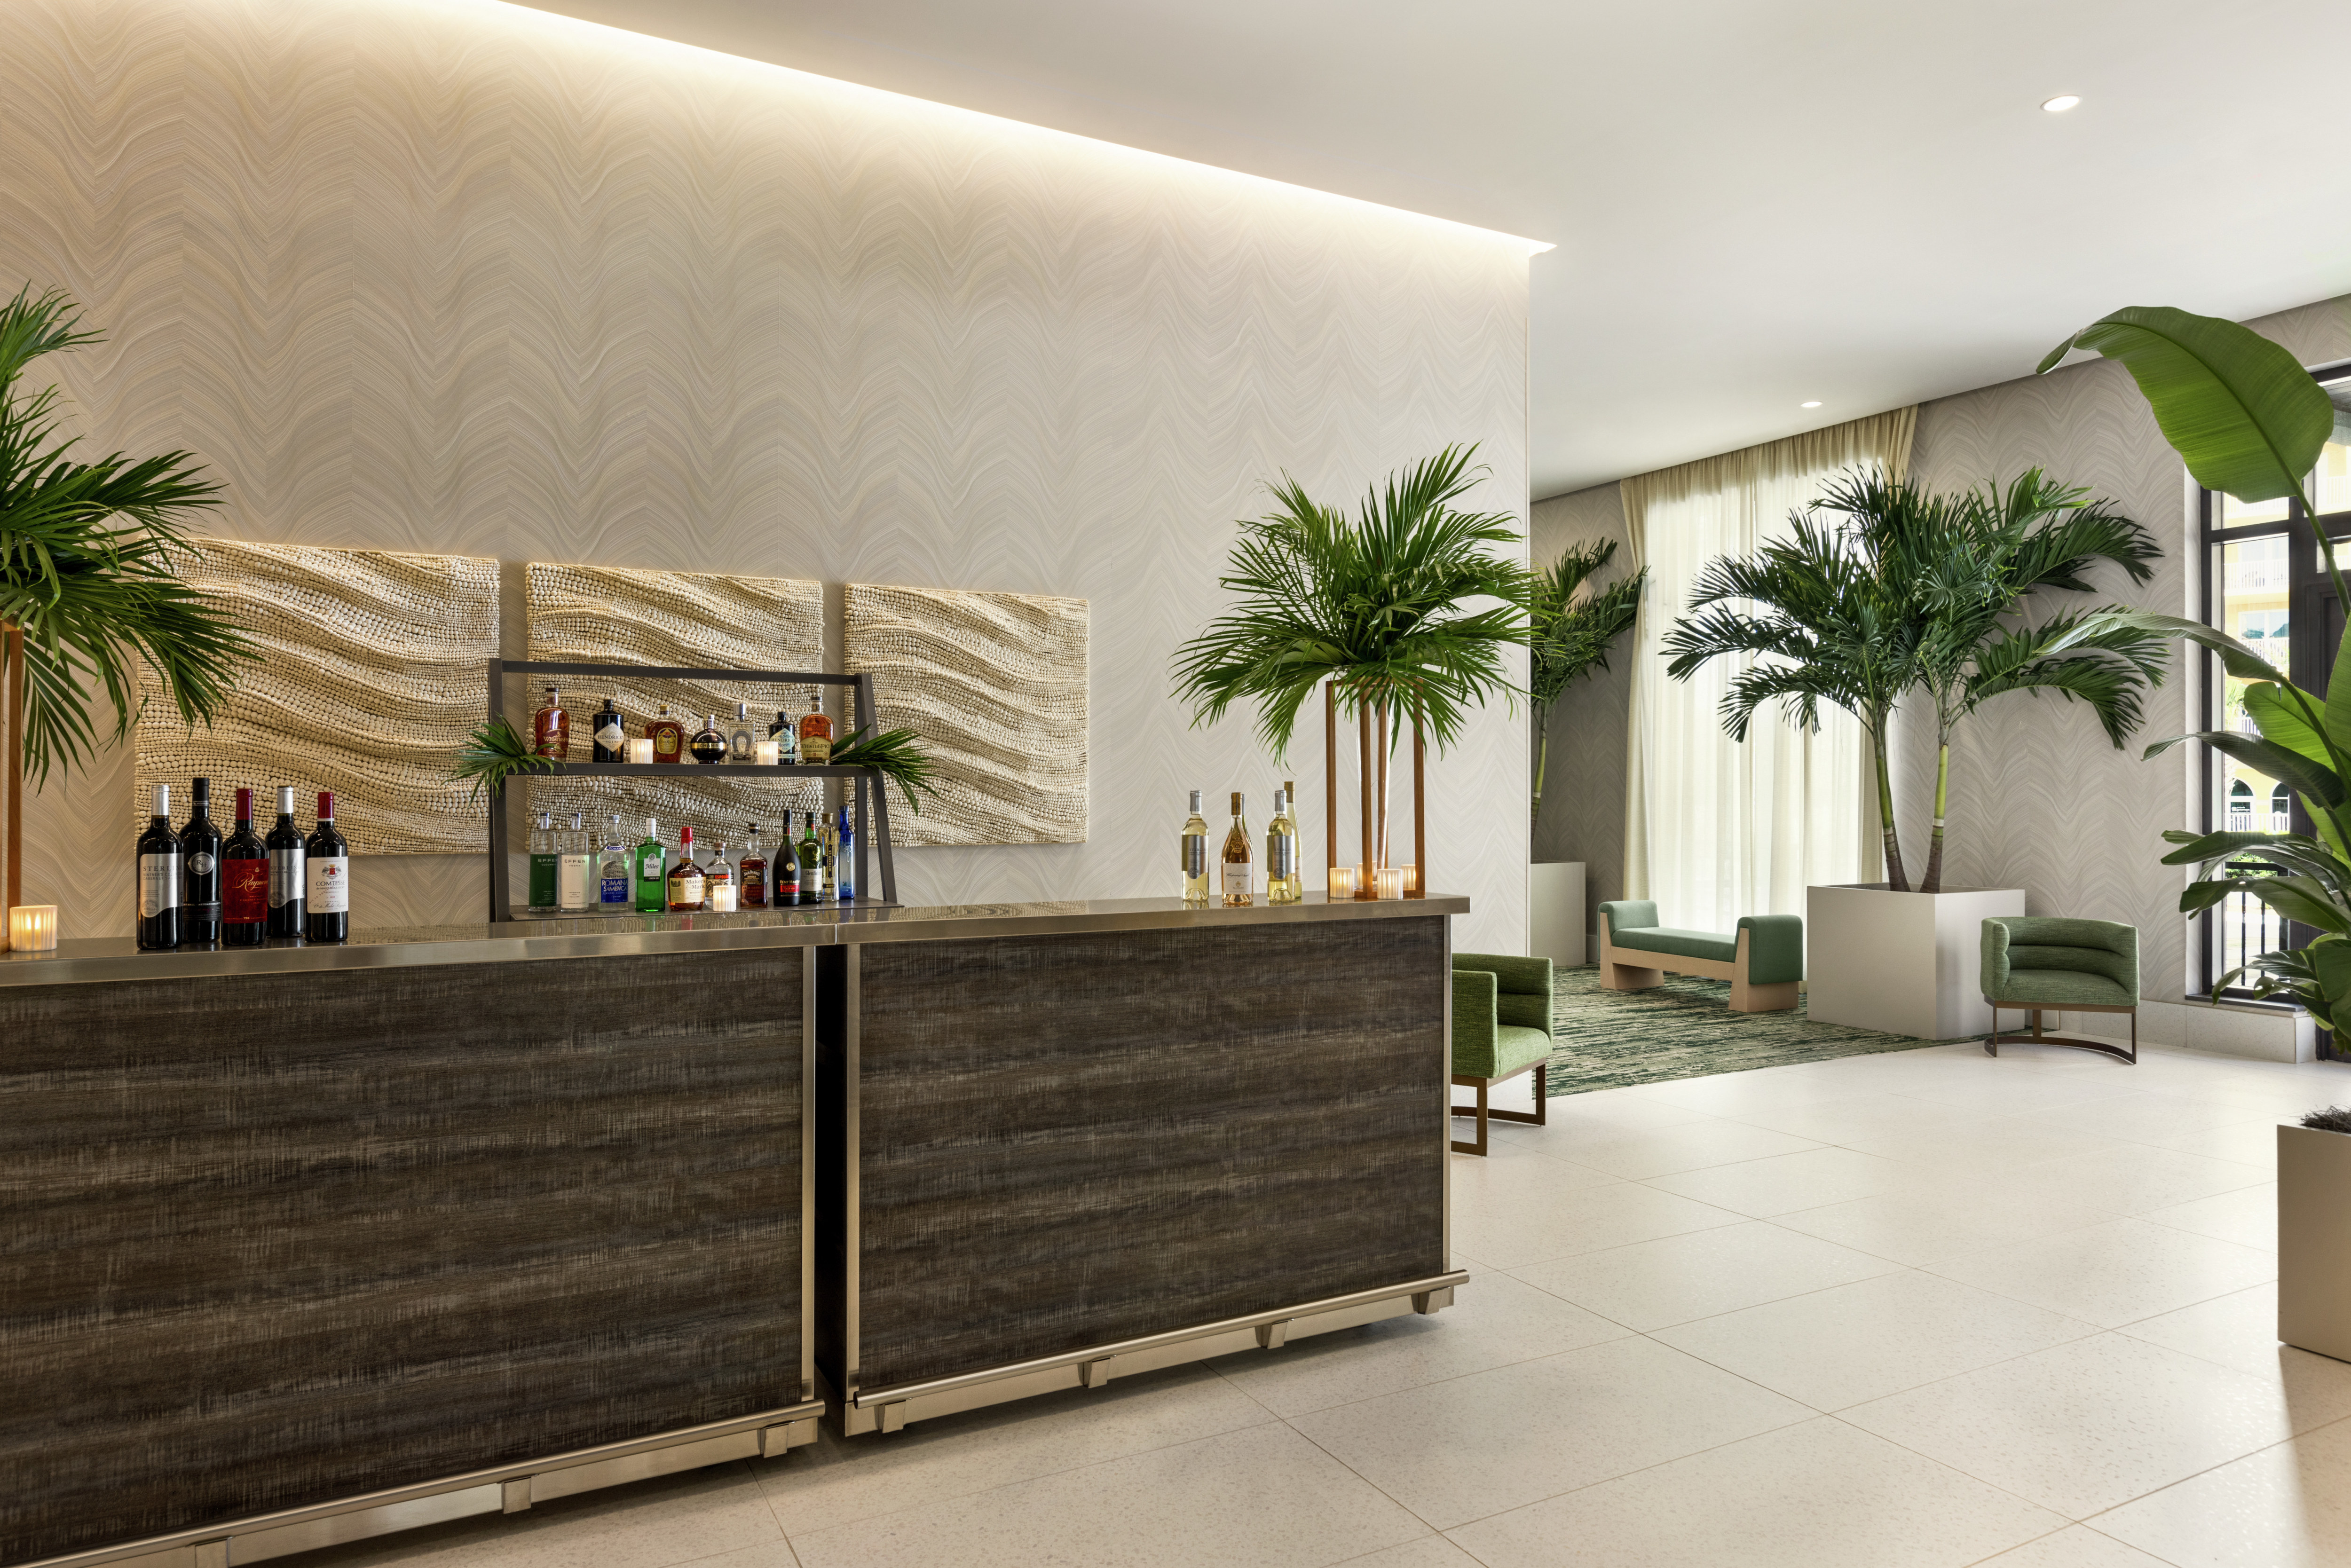 Convenient bar with stylish seating and lush greenery near meeting rooms for corporate and social events